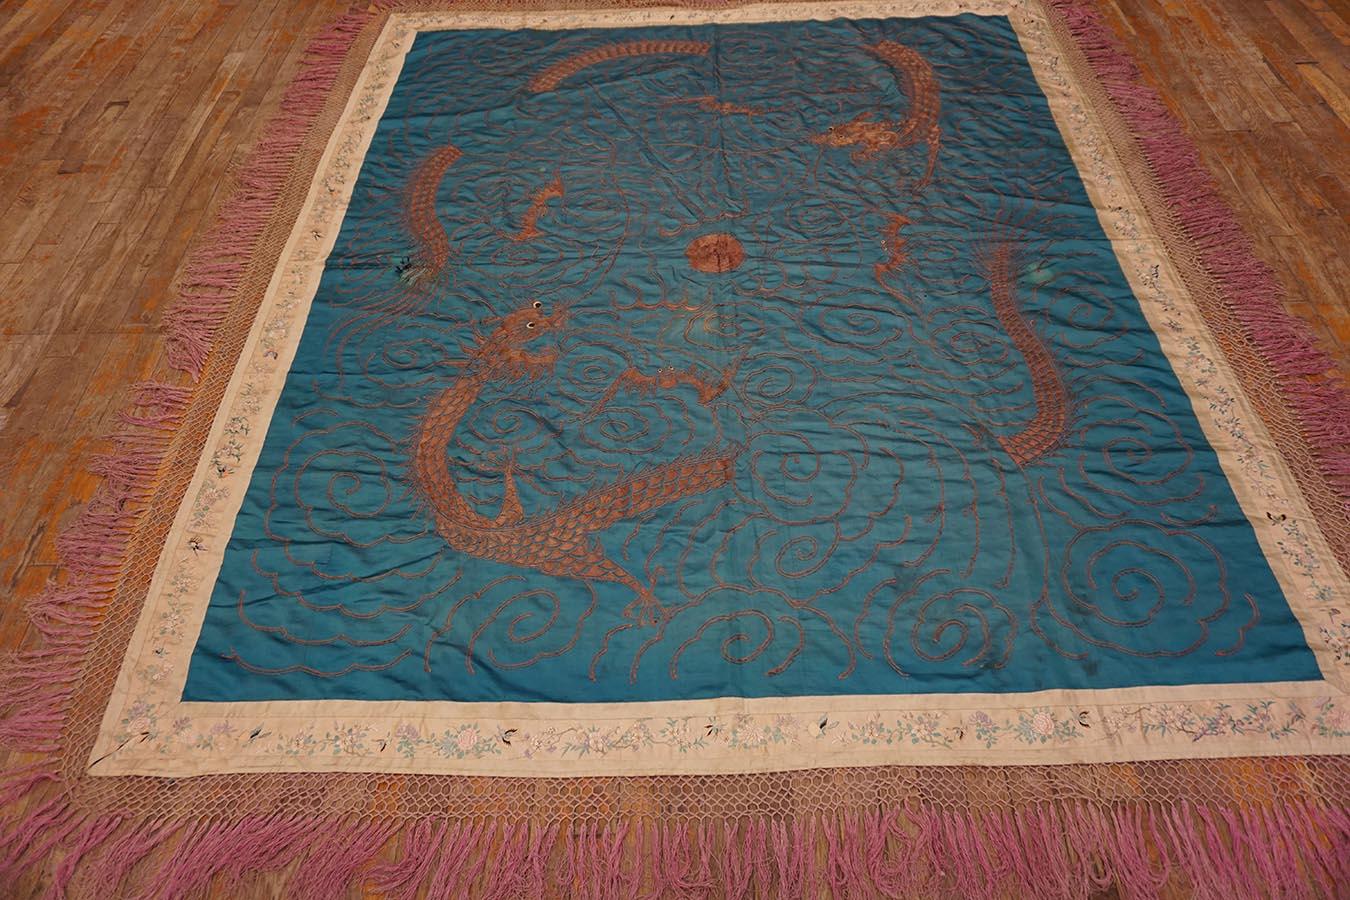 Antique Chinese Textile Rug, Size: 6' x 7' 